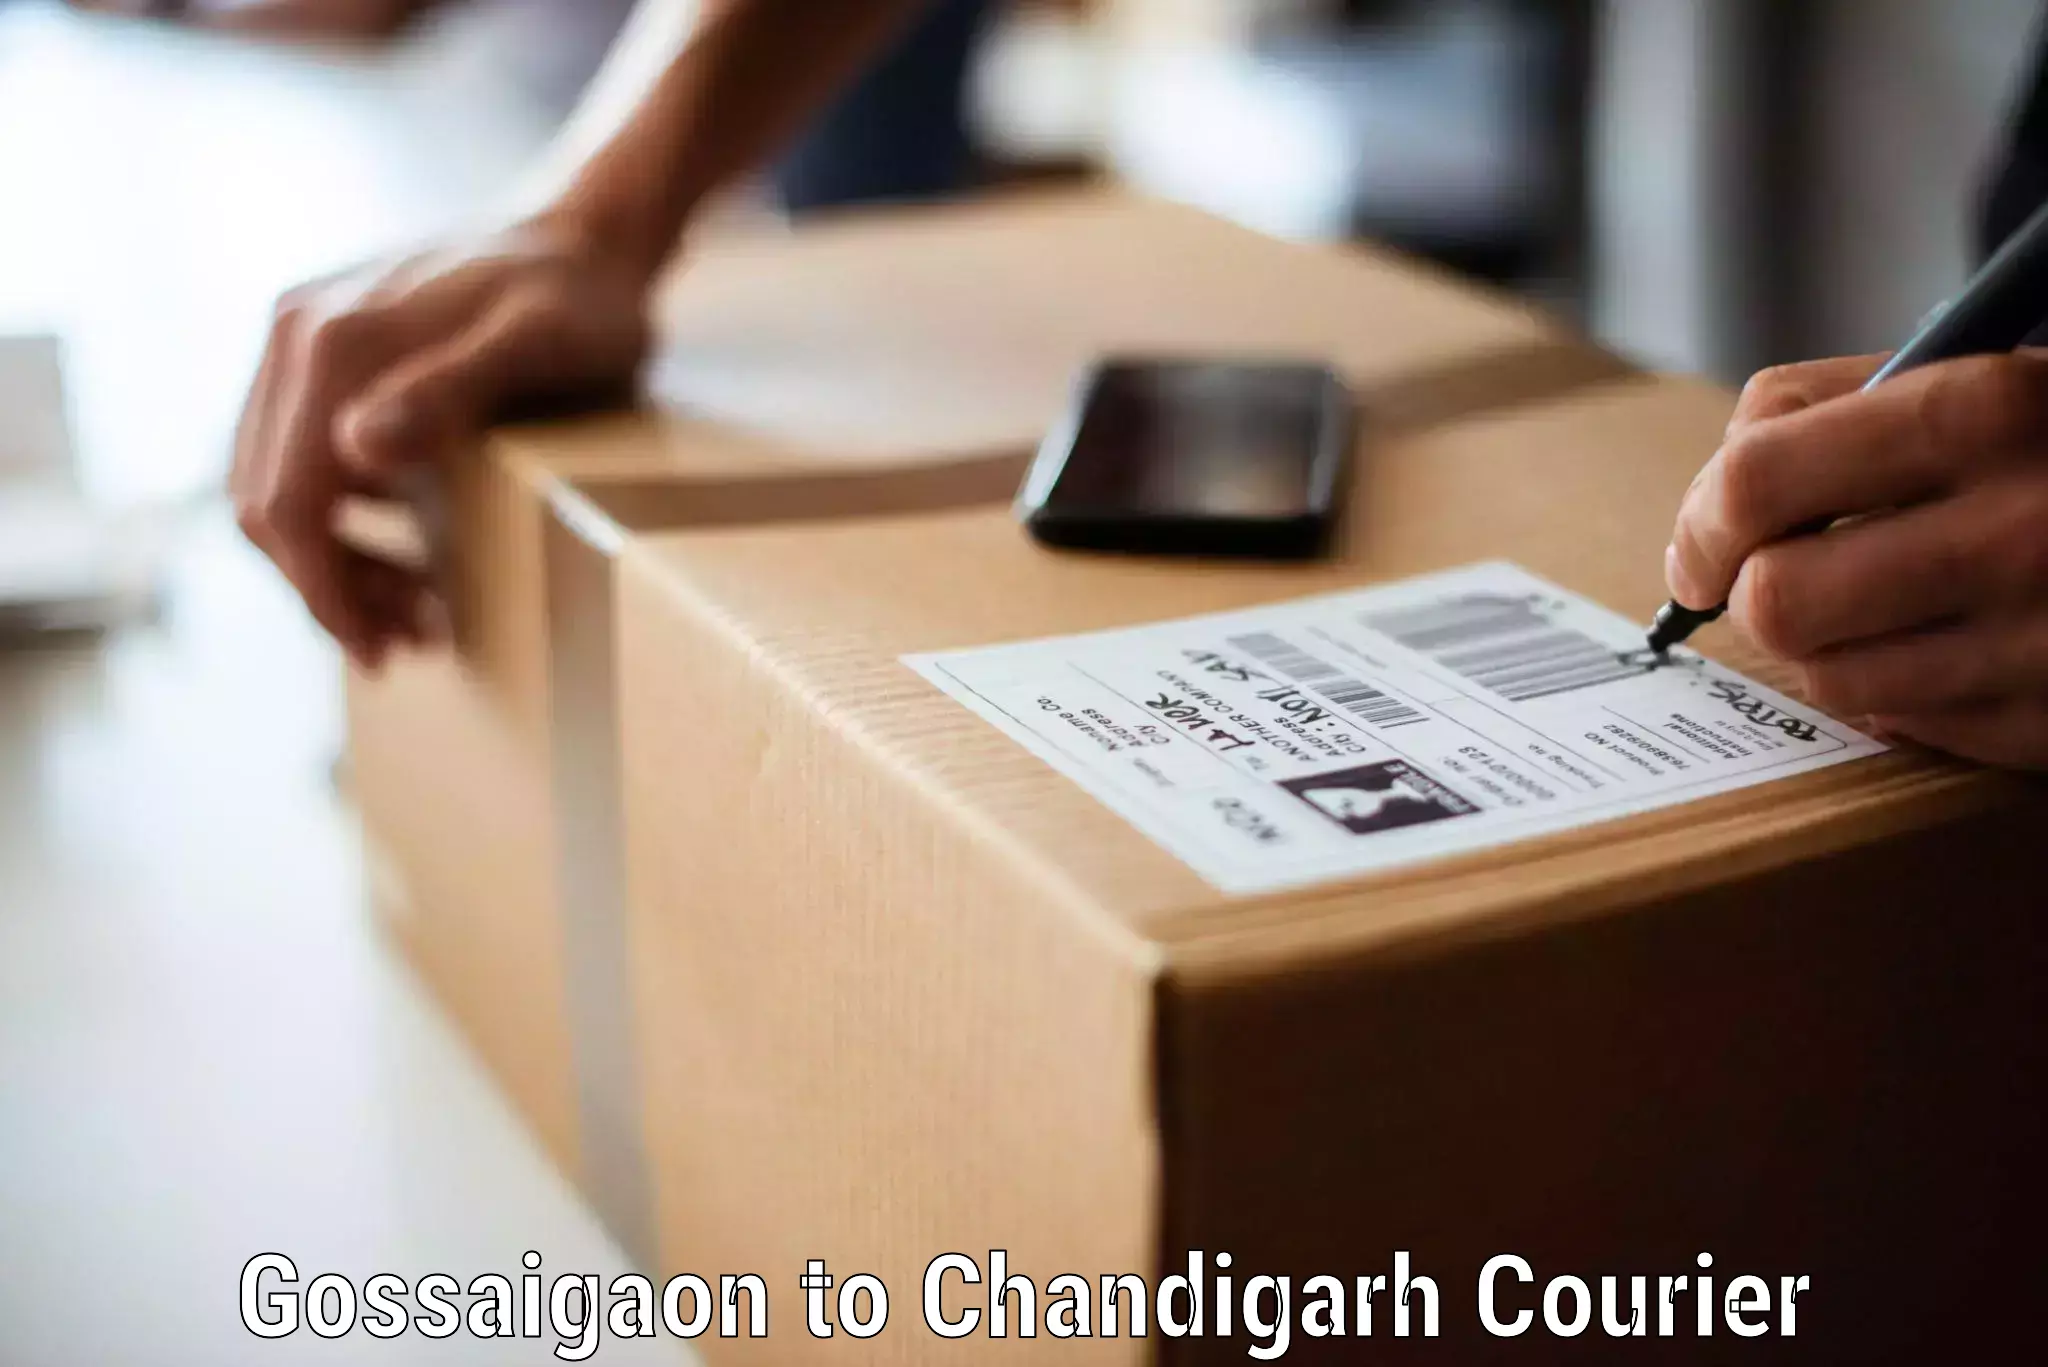 Furniture moving assistance Gossaigaon to Chandigarh